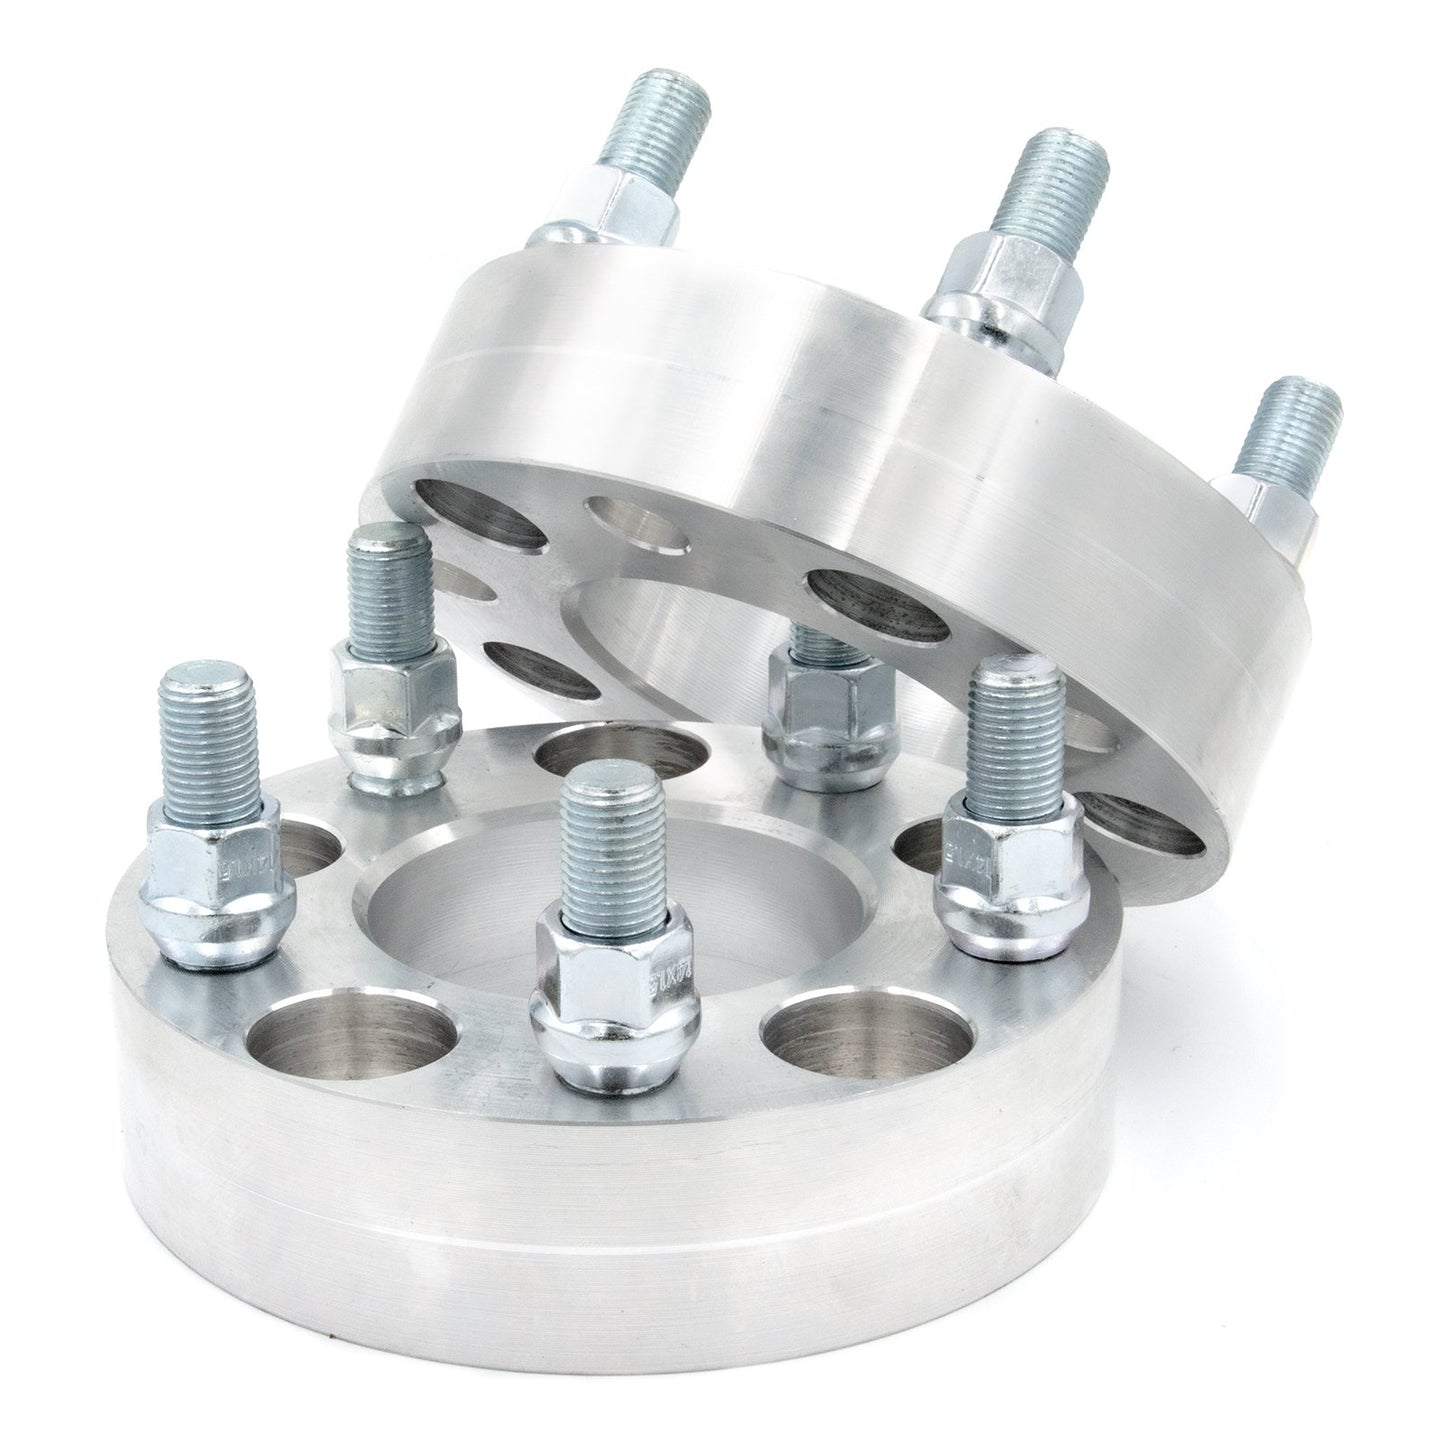 5x4.75" to 5x4.75" Wheel Spacers - Thickness: 3/4"- 4"